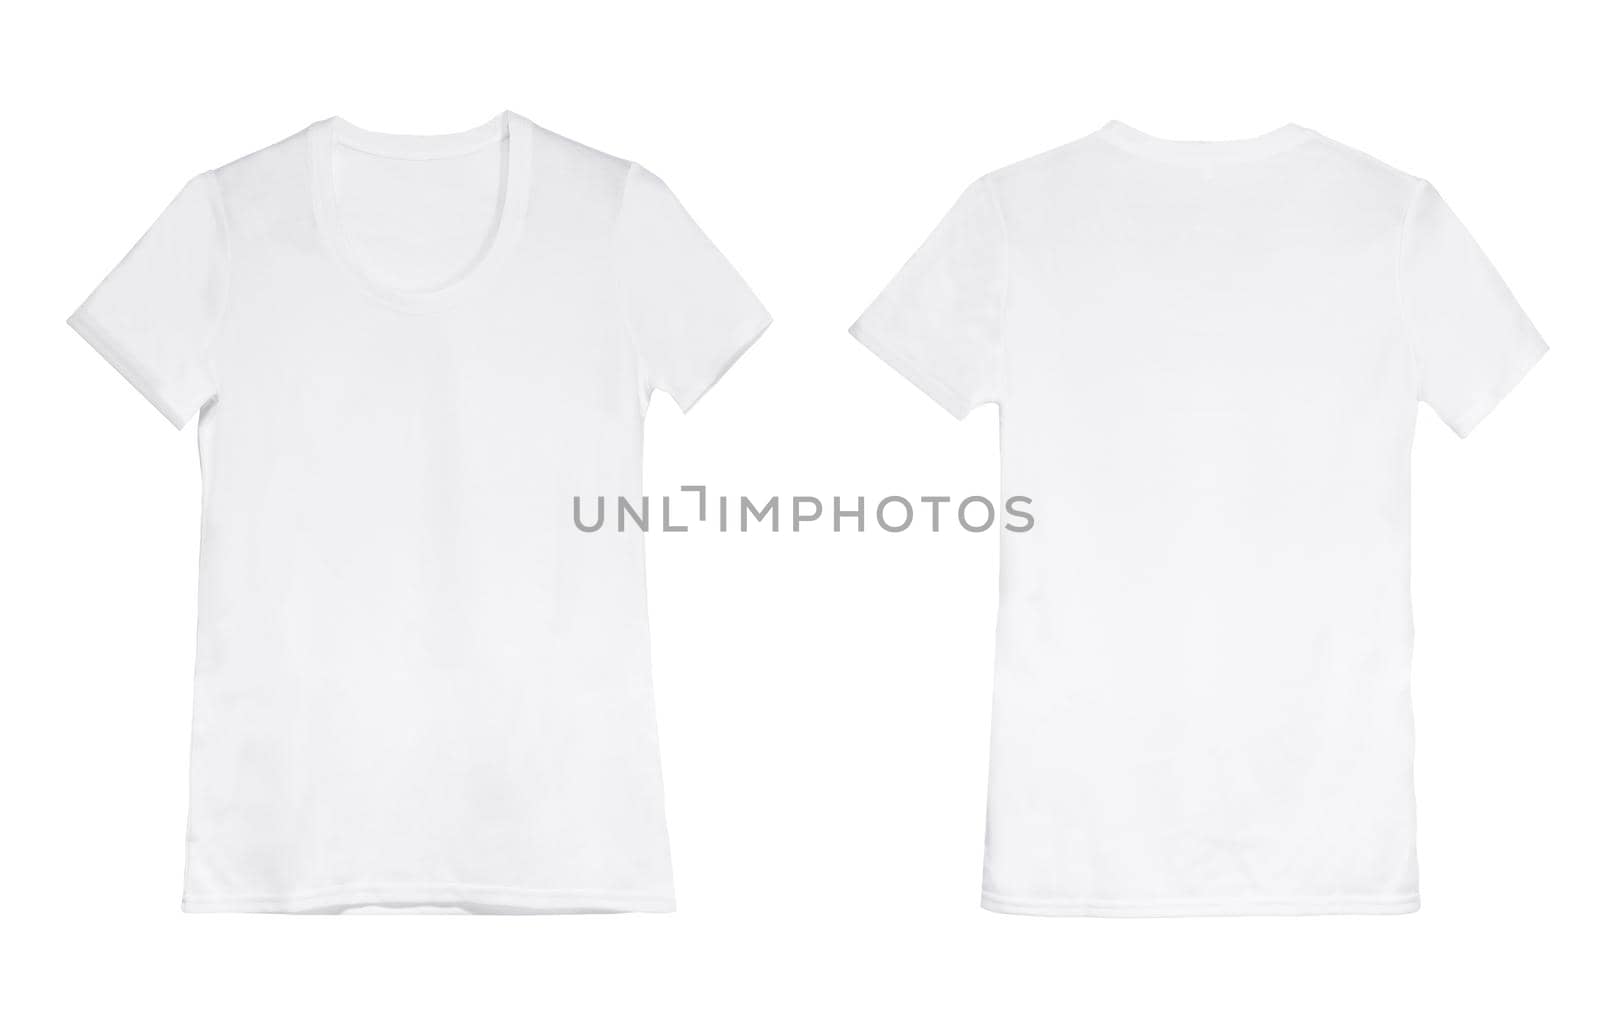 white woman t-shirt on hanger isolated on a white background, back view